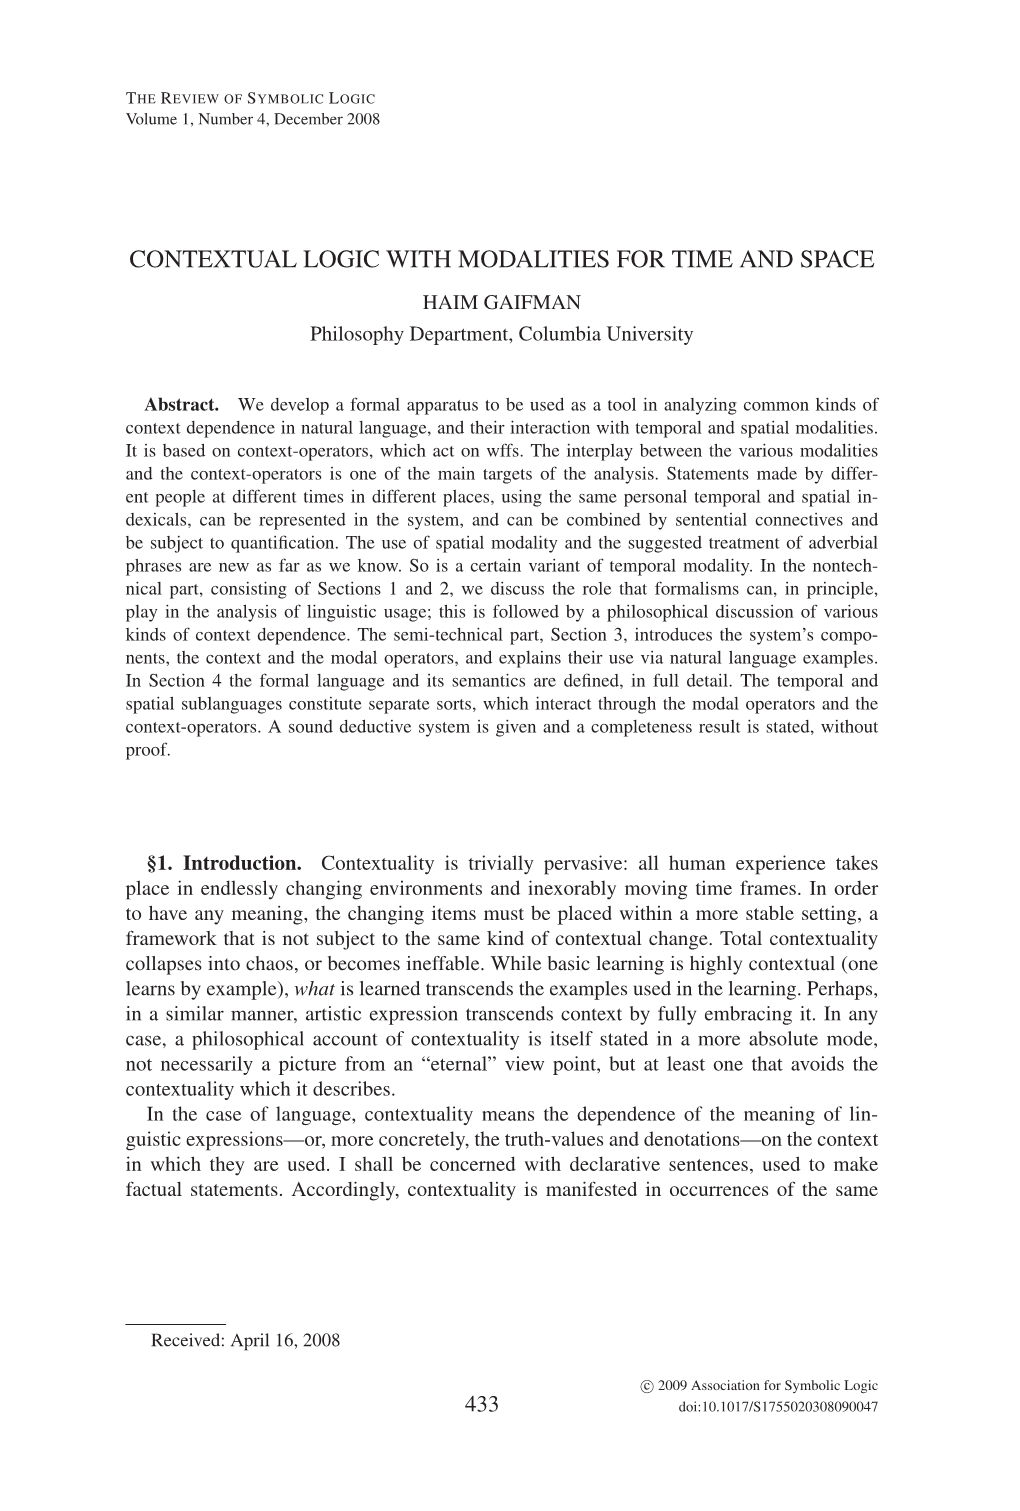 CONTEXTUAL LOGIC with MODALITIES for TIME and SPACE HAIM GAIFMAN Philosophy Department, Columbia University